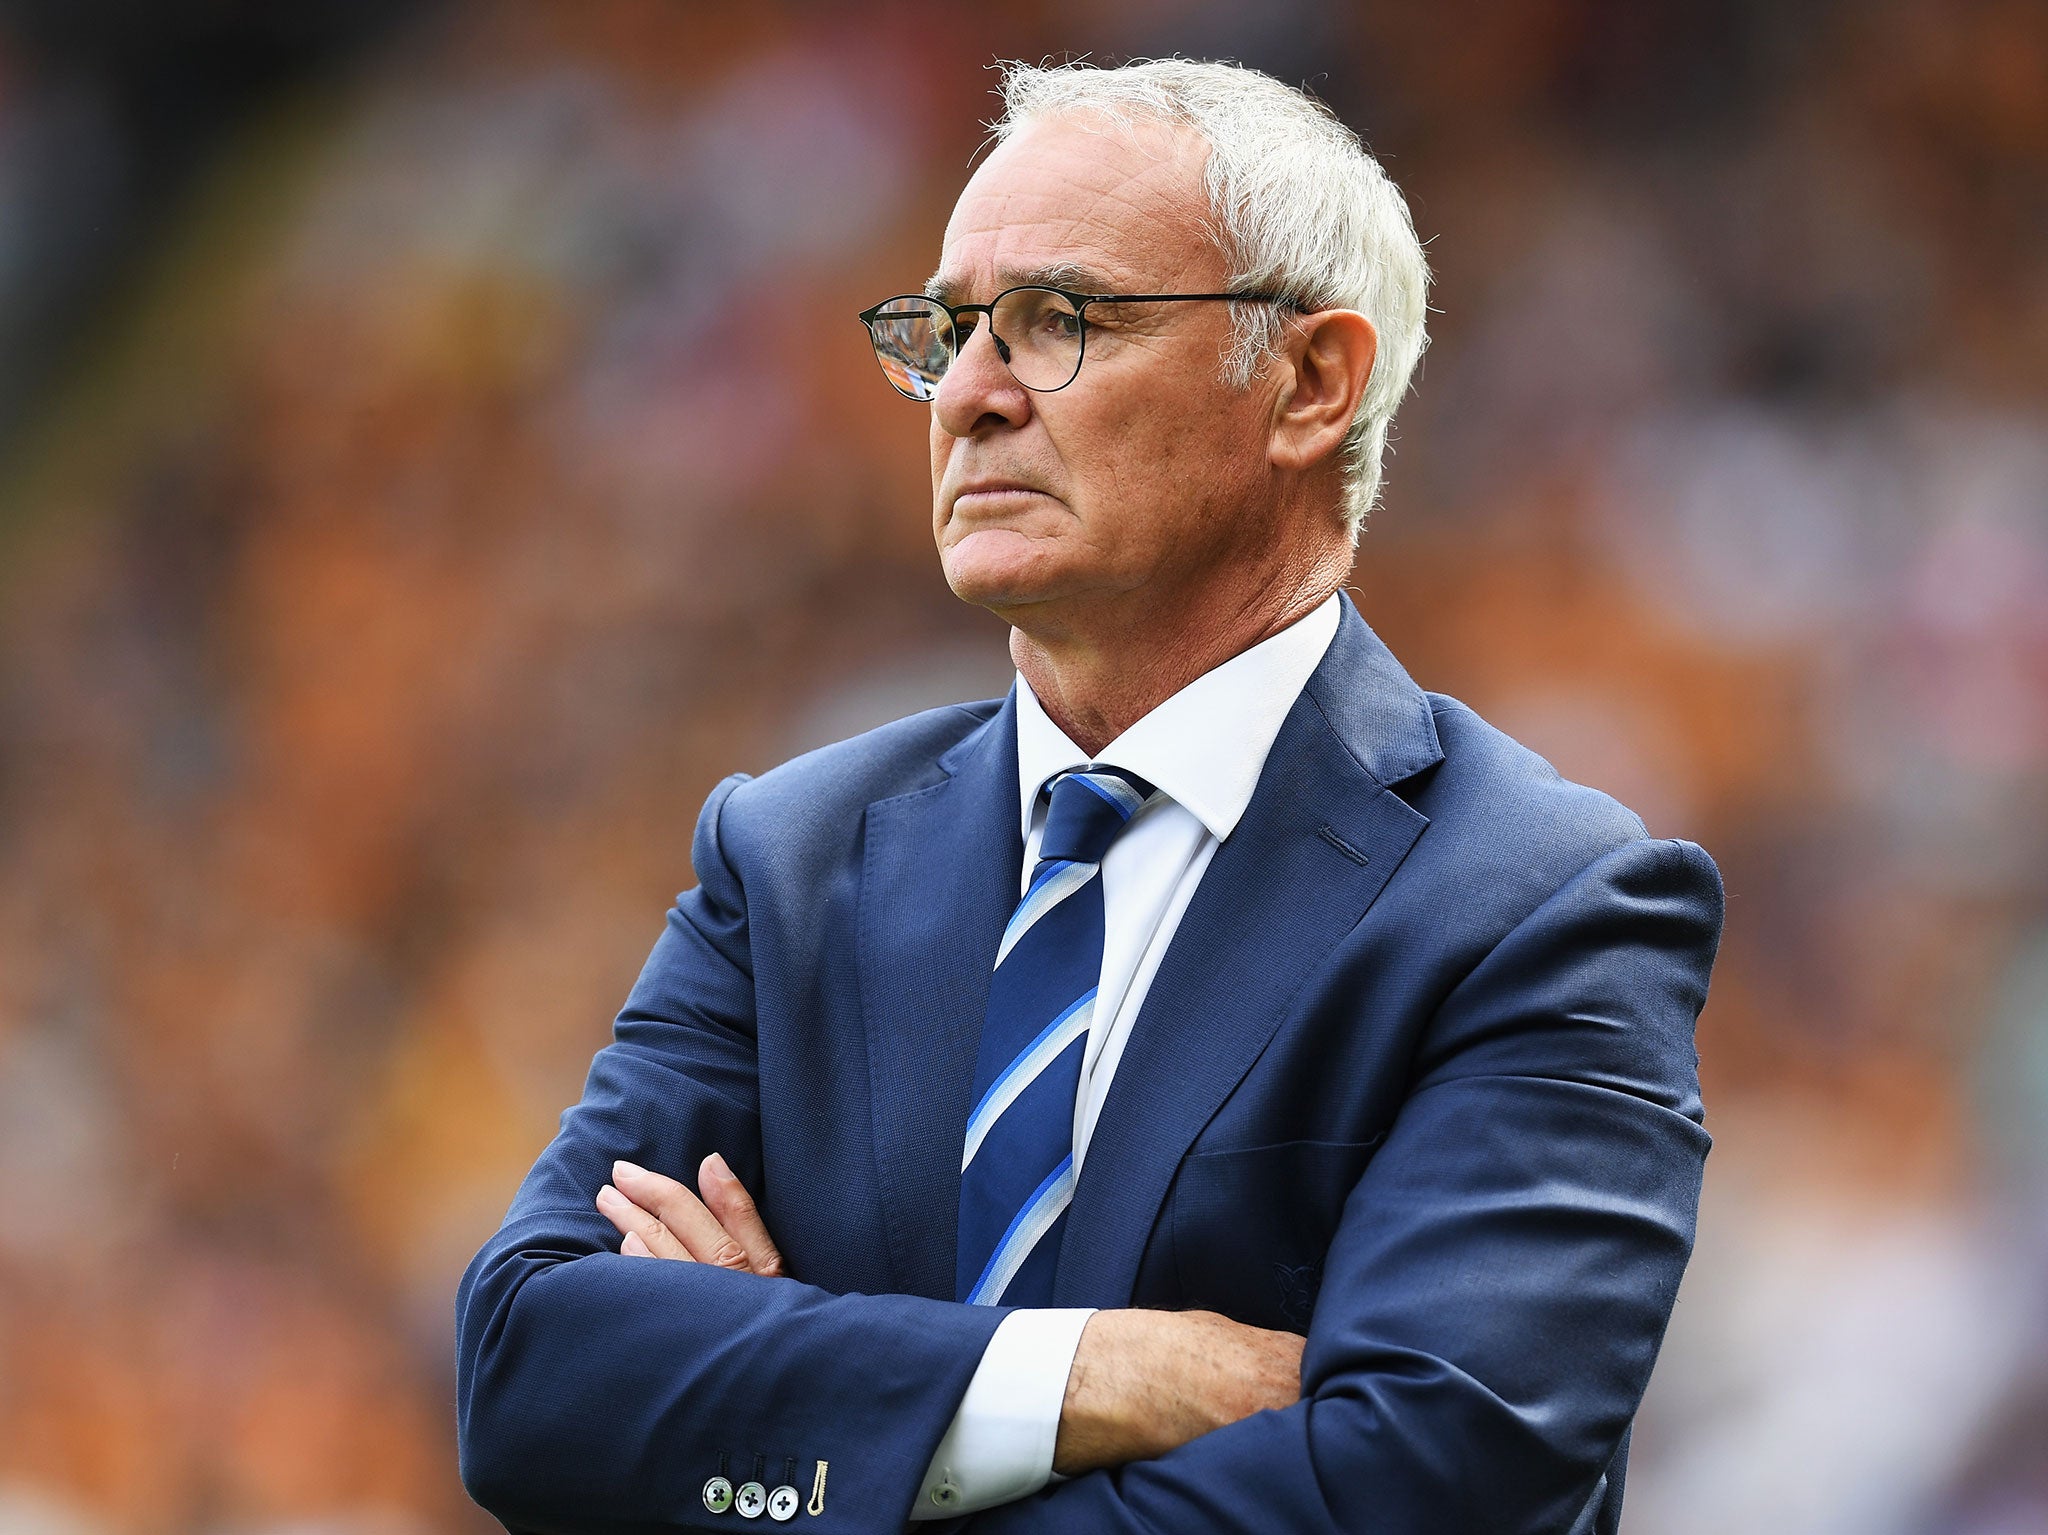 "Every team in the competition will fight like champions and we must give 100 per cent to make our supporters proud," Ranieri said